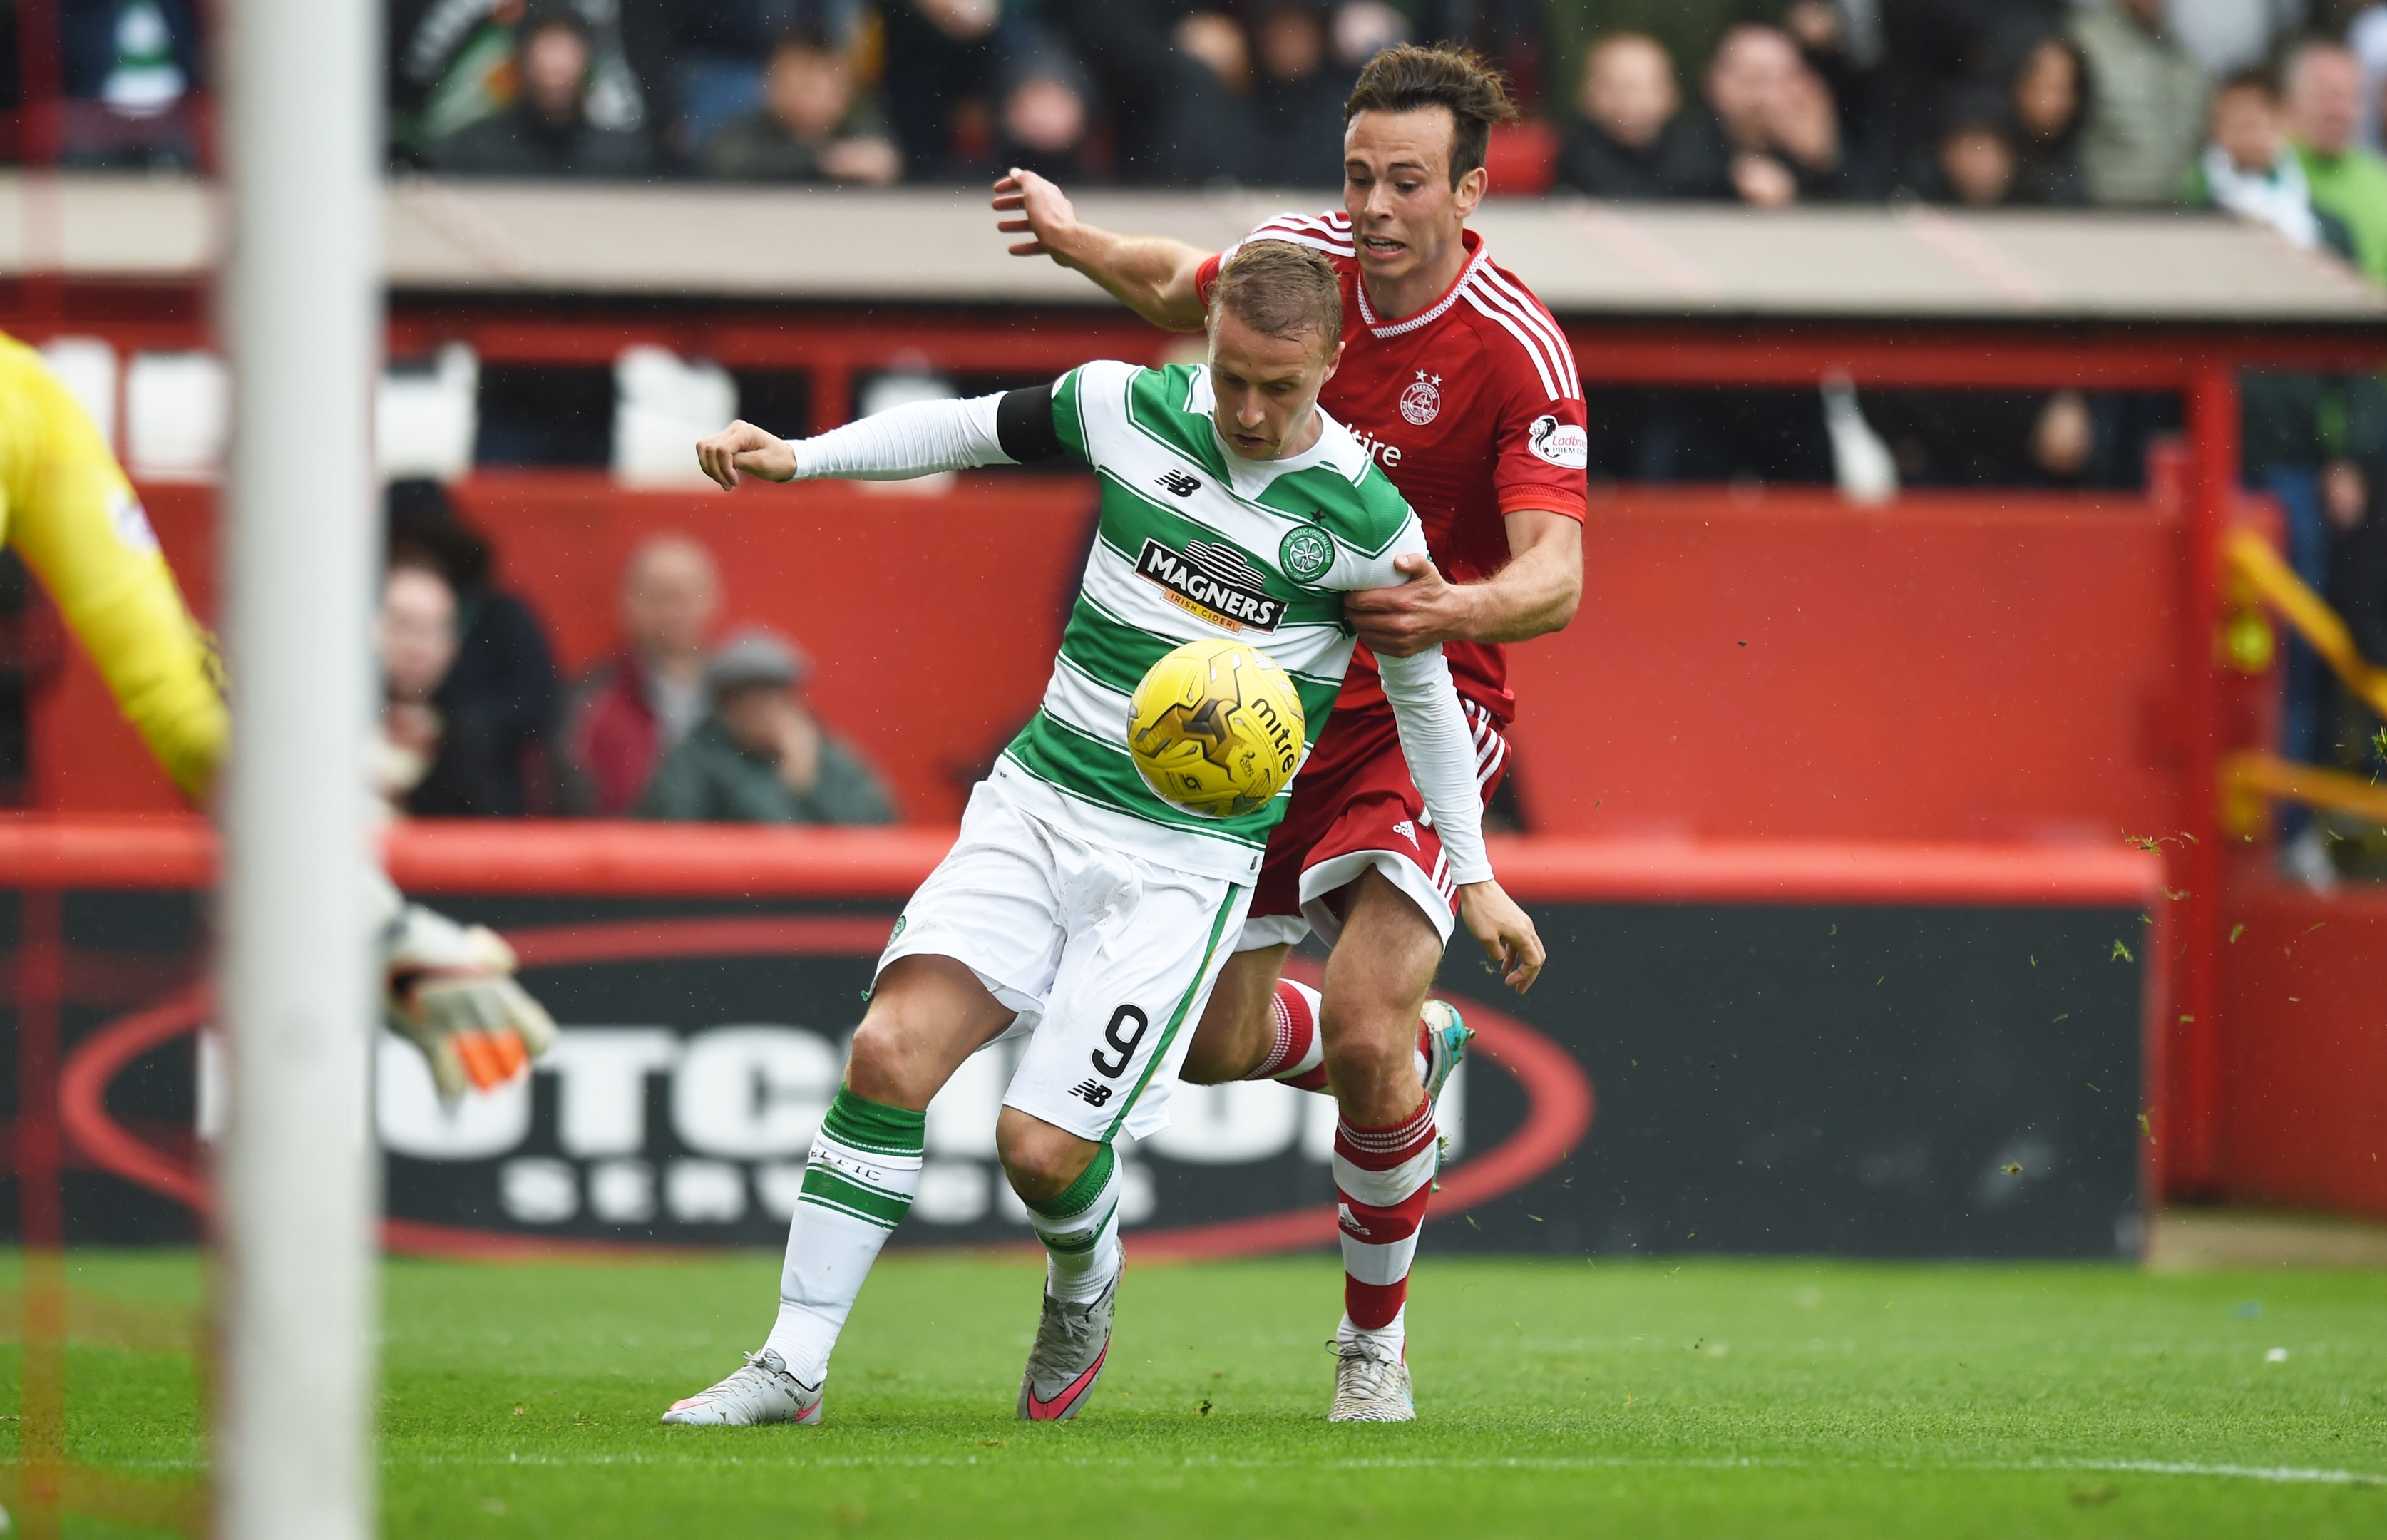 Griffiths (left) is brought down by Andrew Considine to win a penalty